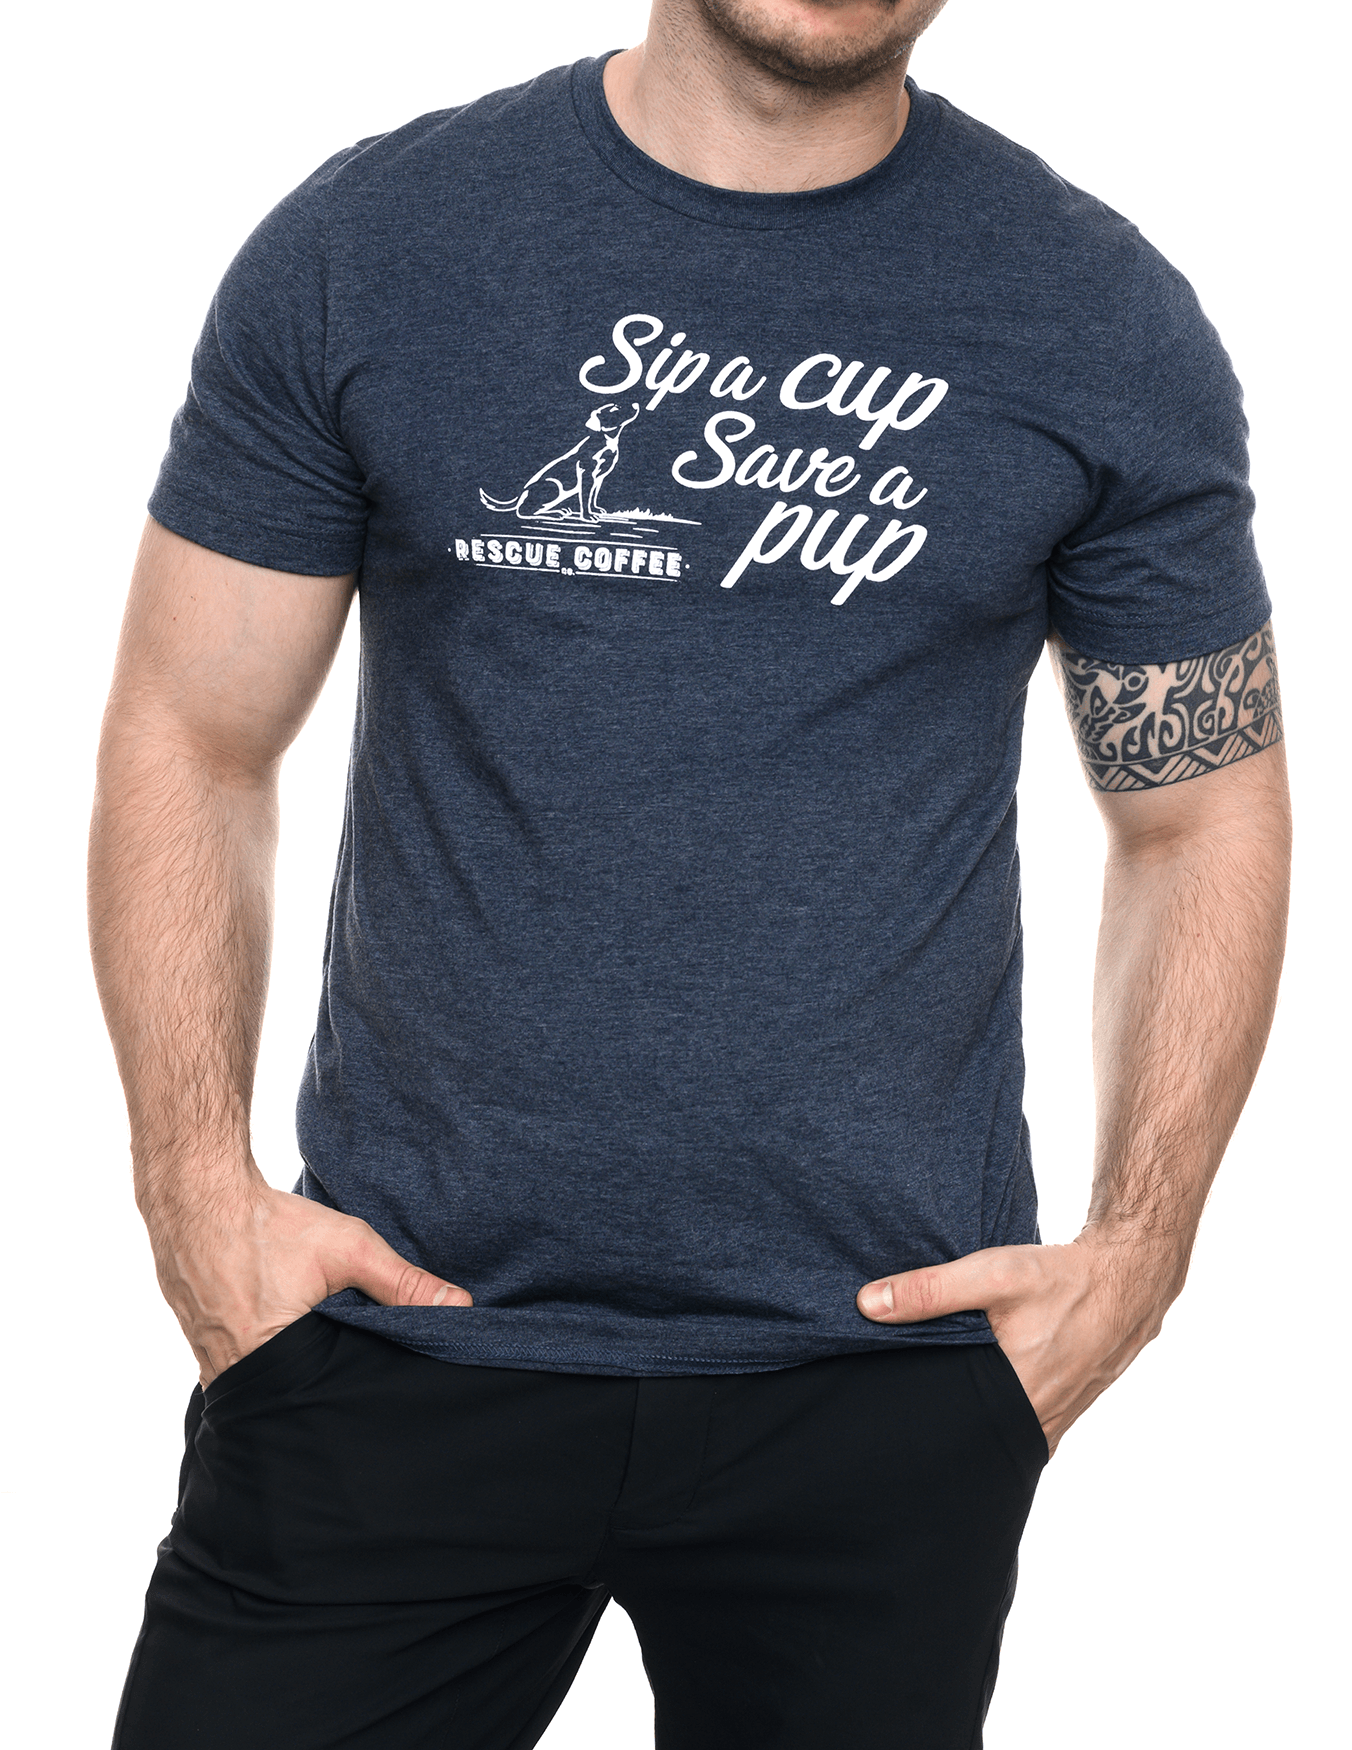 Unisex T-shirt: Save a Pup - Rescue Coffee Co.